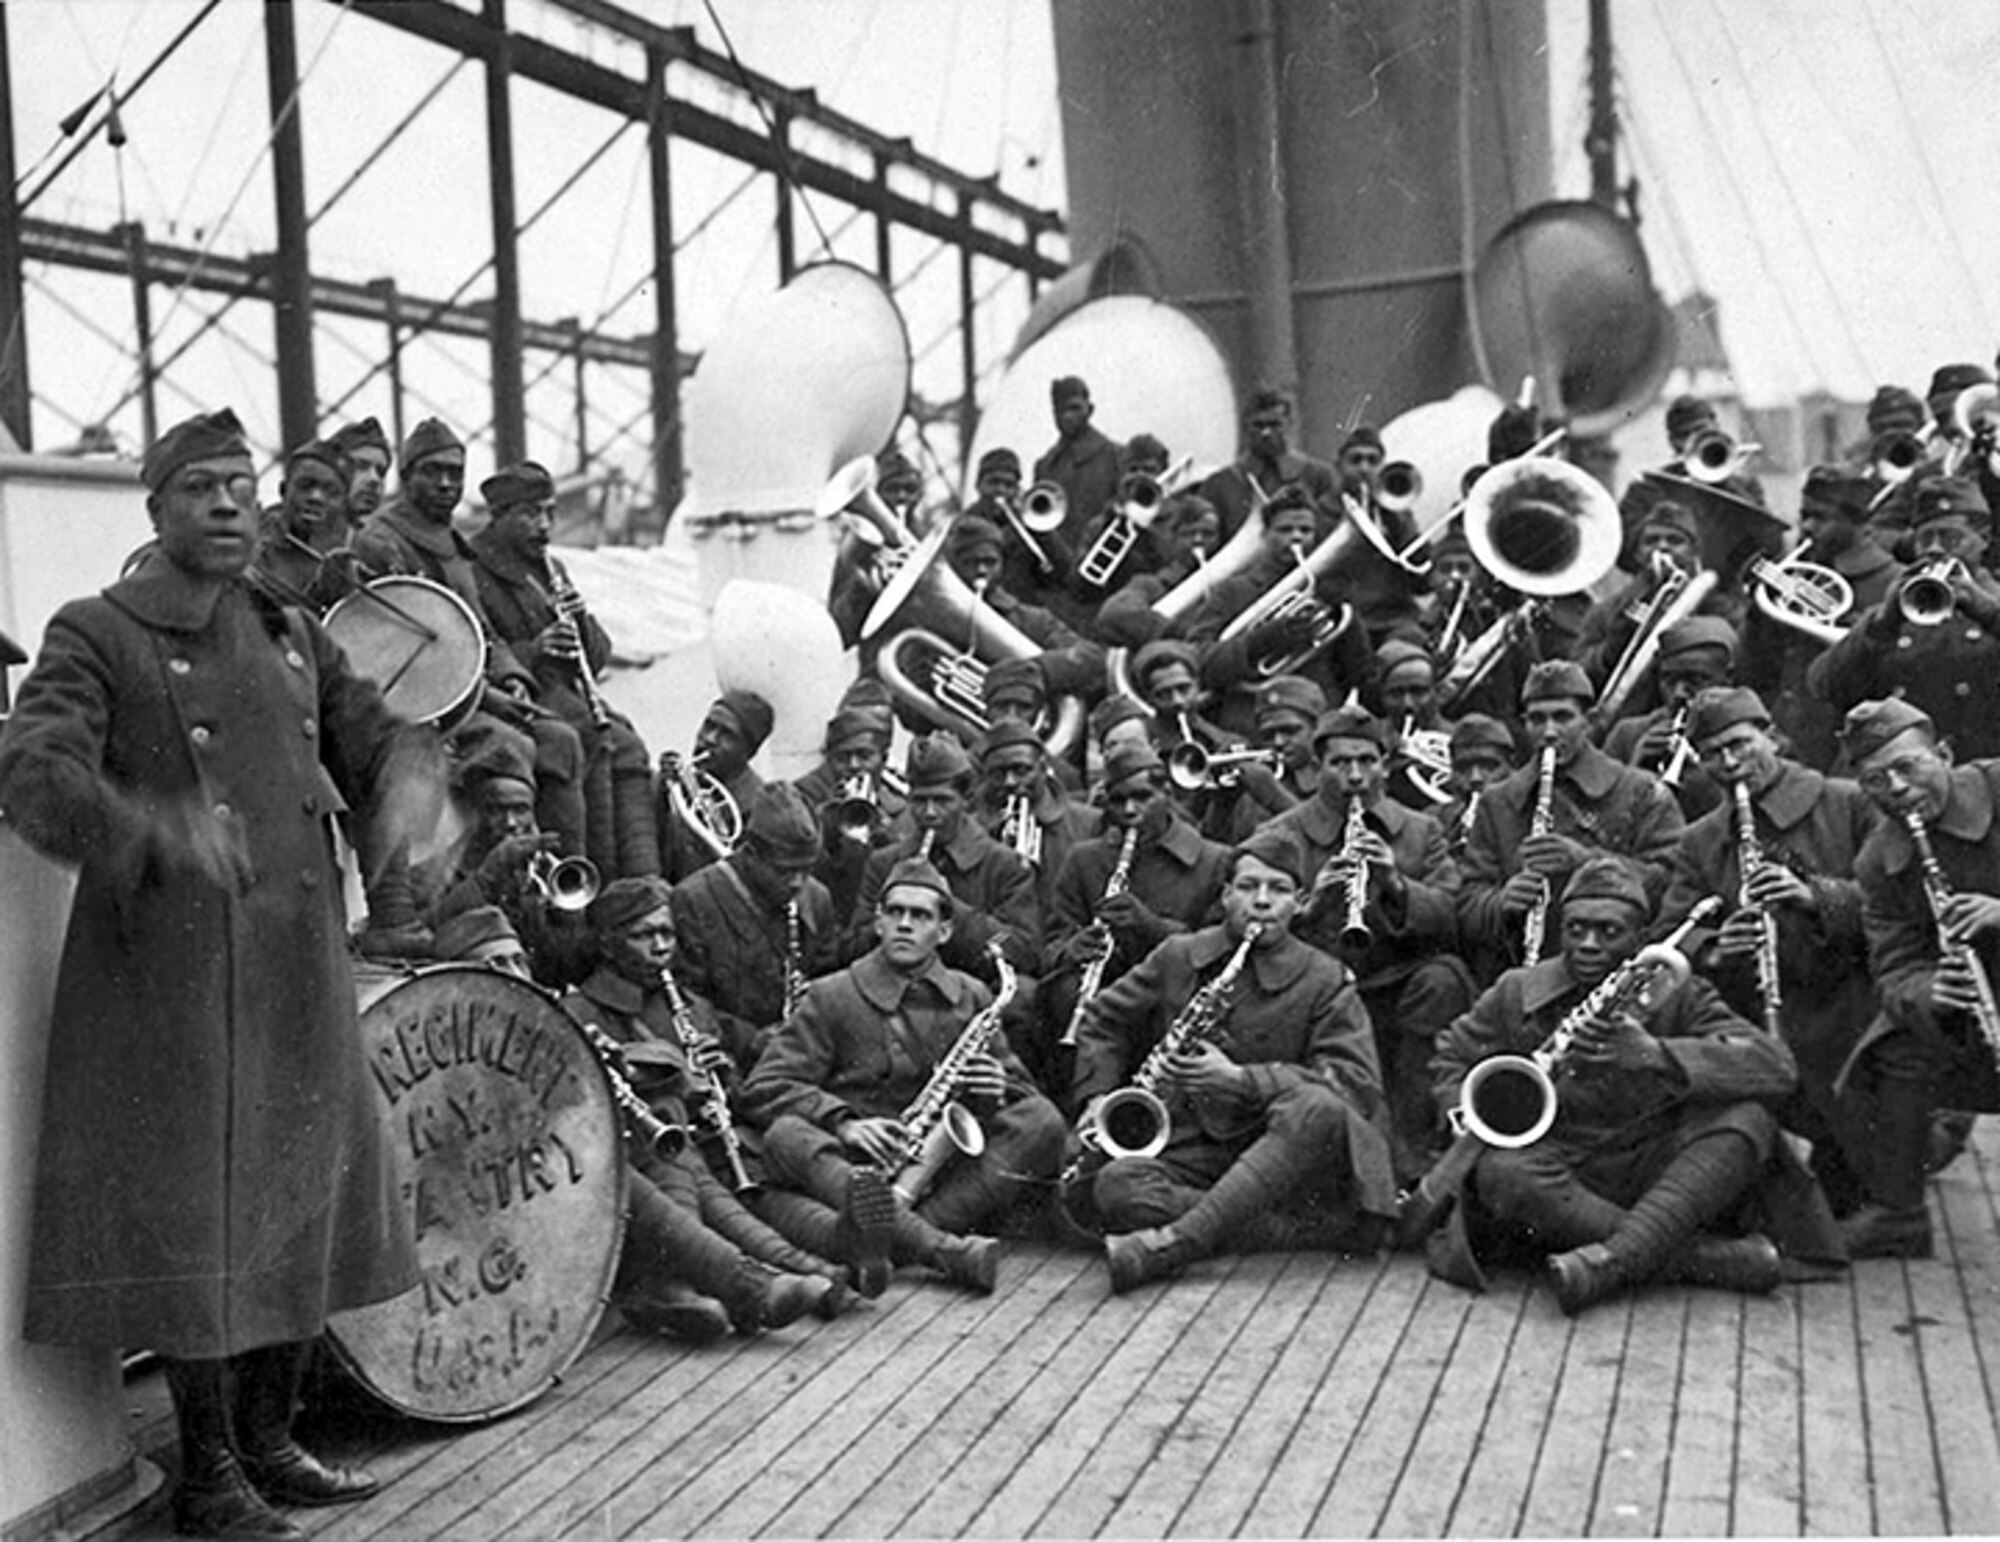 Lt. James Reese Europe, band director, far left, poses the jazz band of the 369th Infantry Regiment on the way home from war. Many music historians credit the music of the 369th for laying the foundation for the popularity of jazz music in France after the end of World War I.